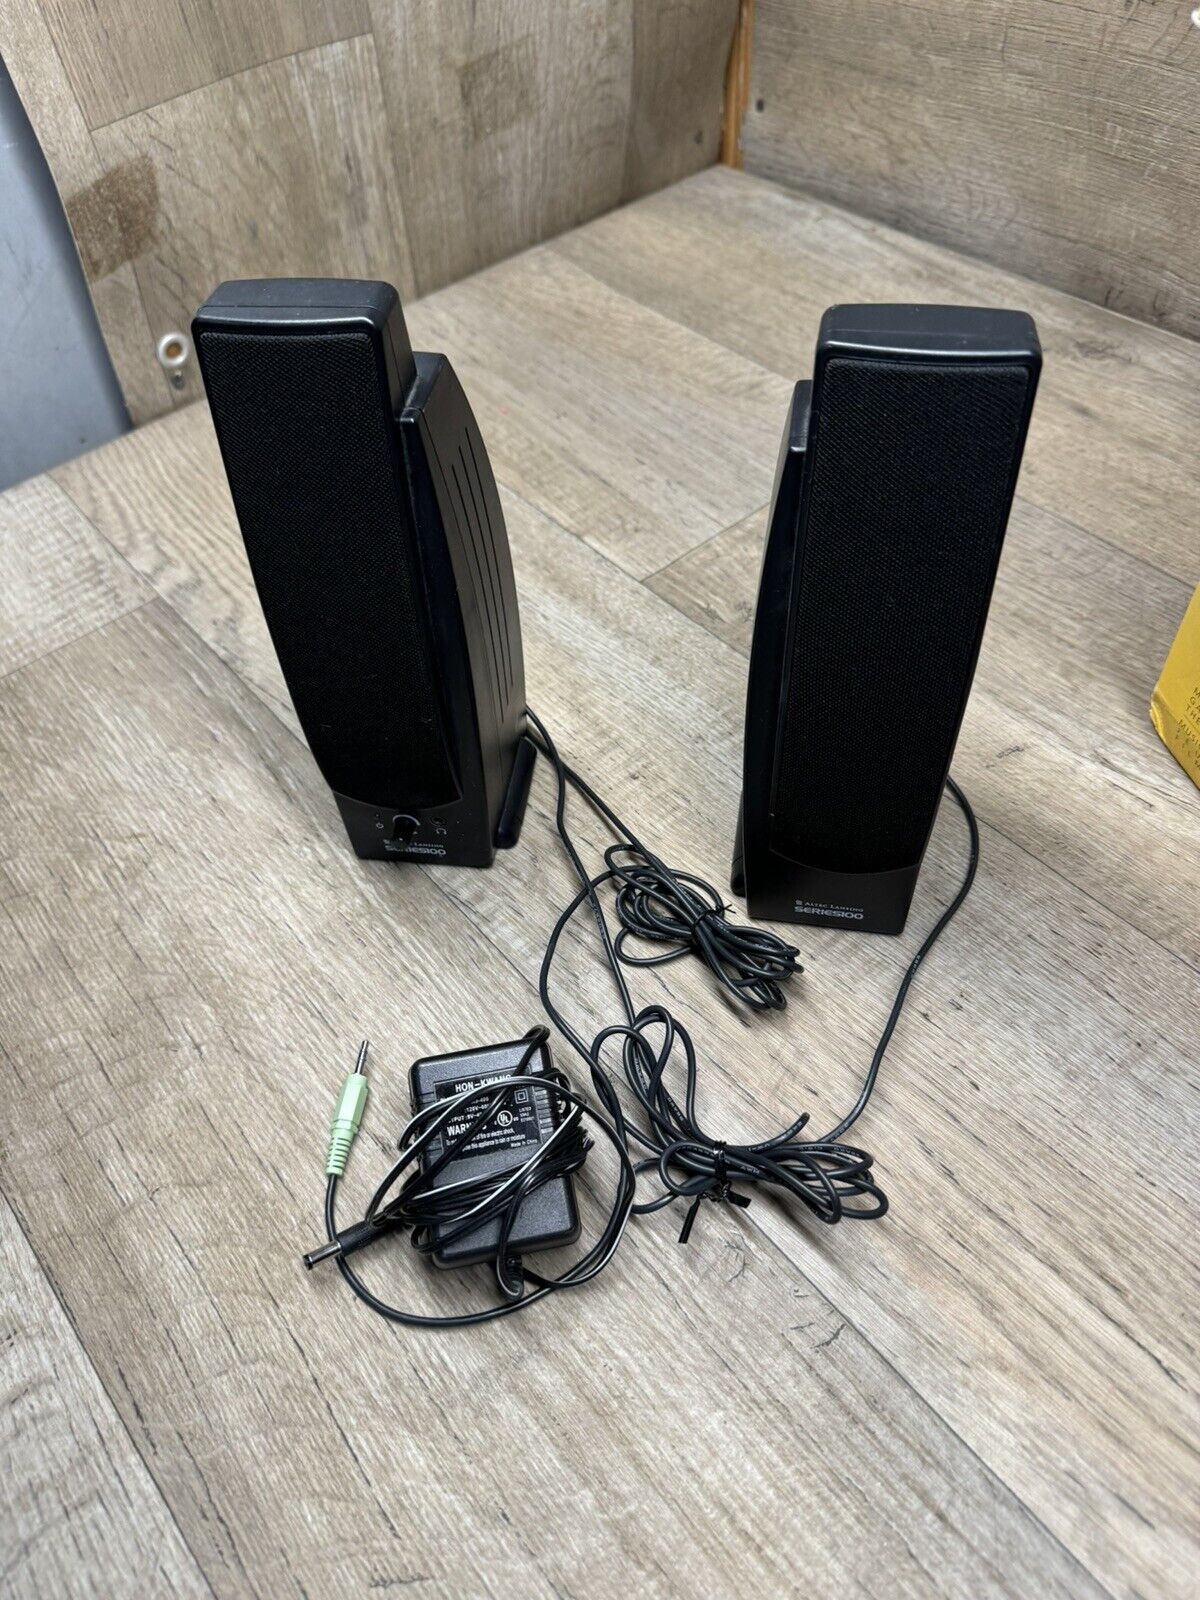 Altec Lansing Series 100 Computer Speakers 120 Powered Audio With Power Cord